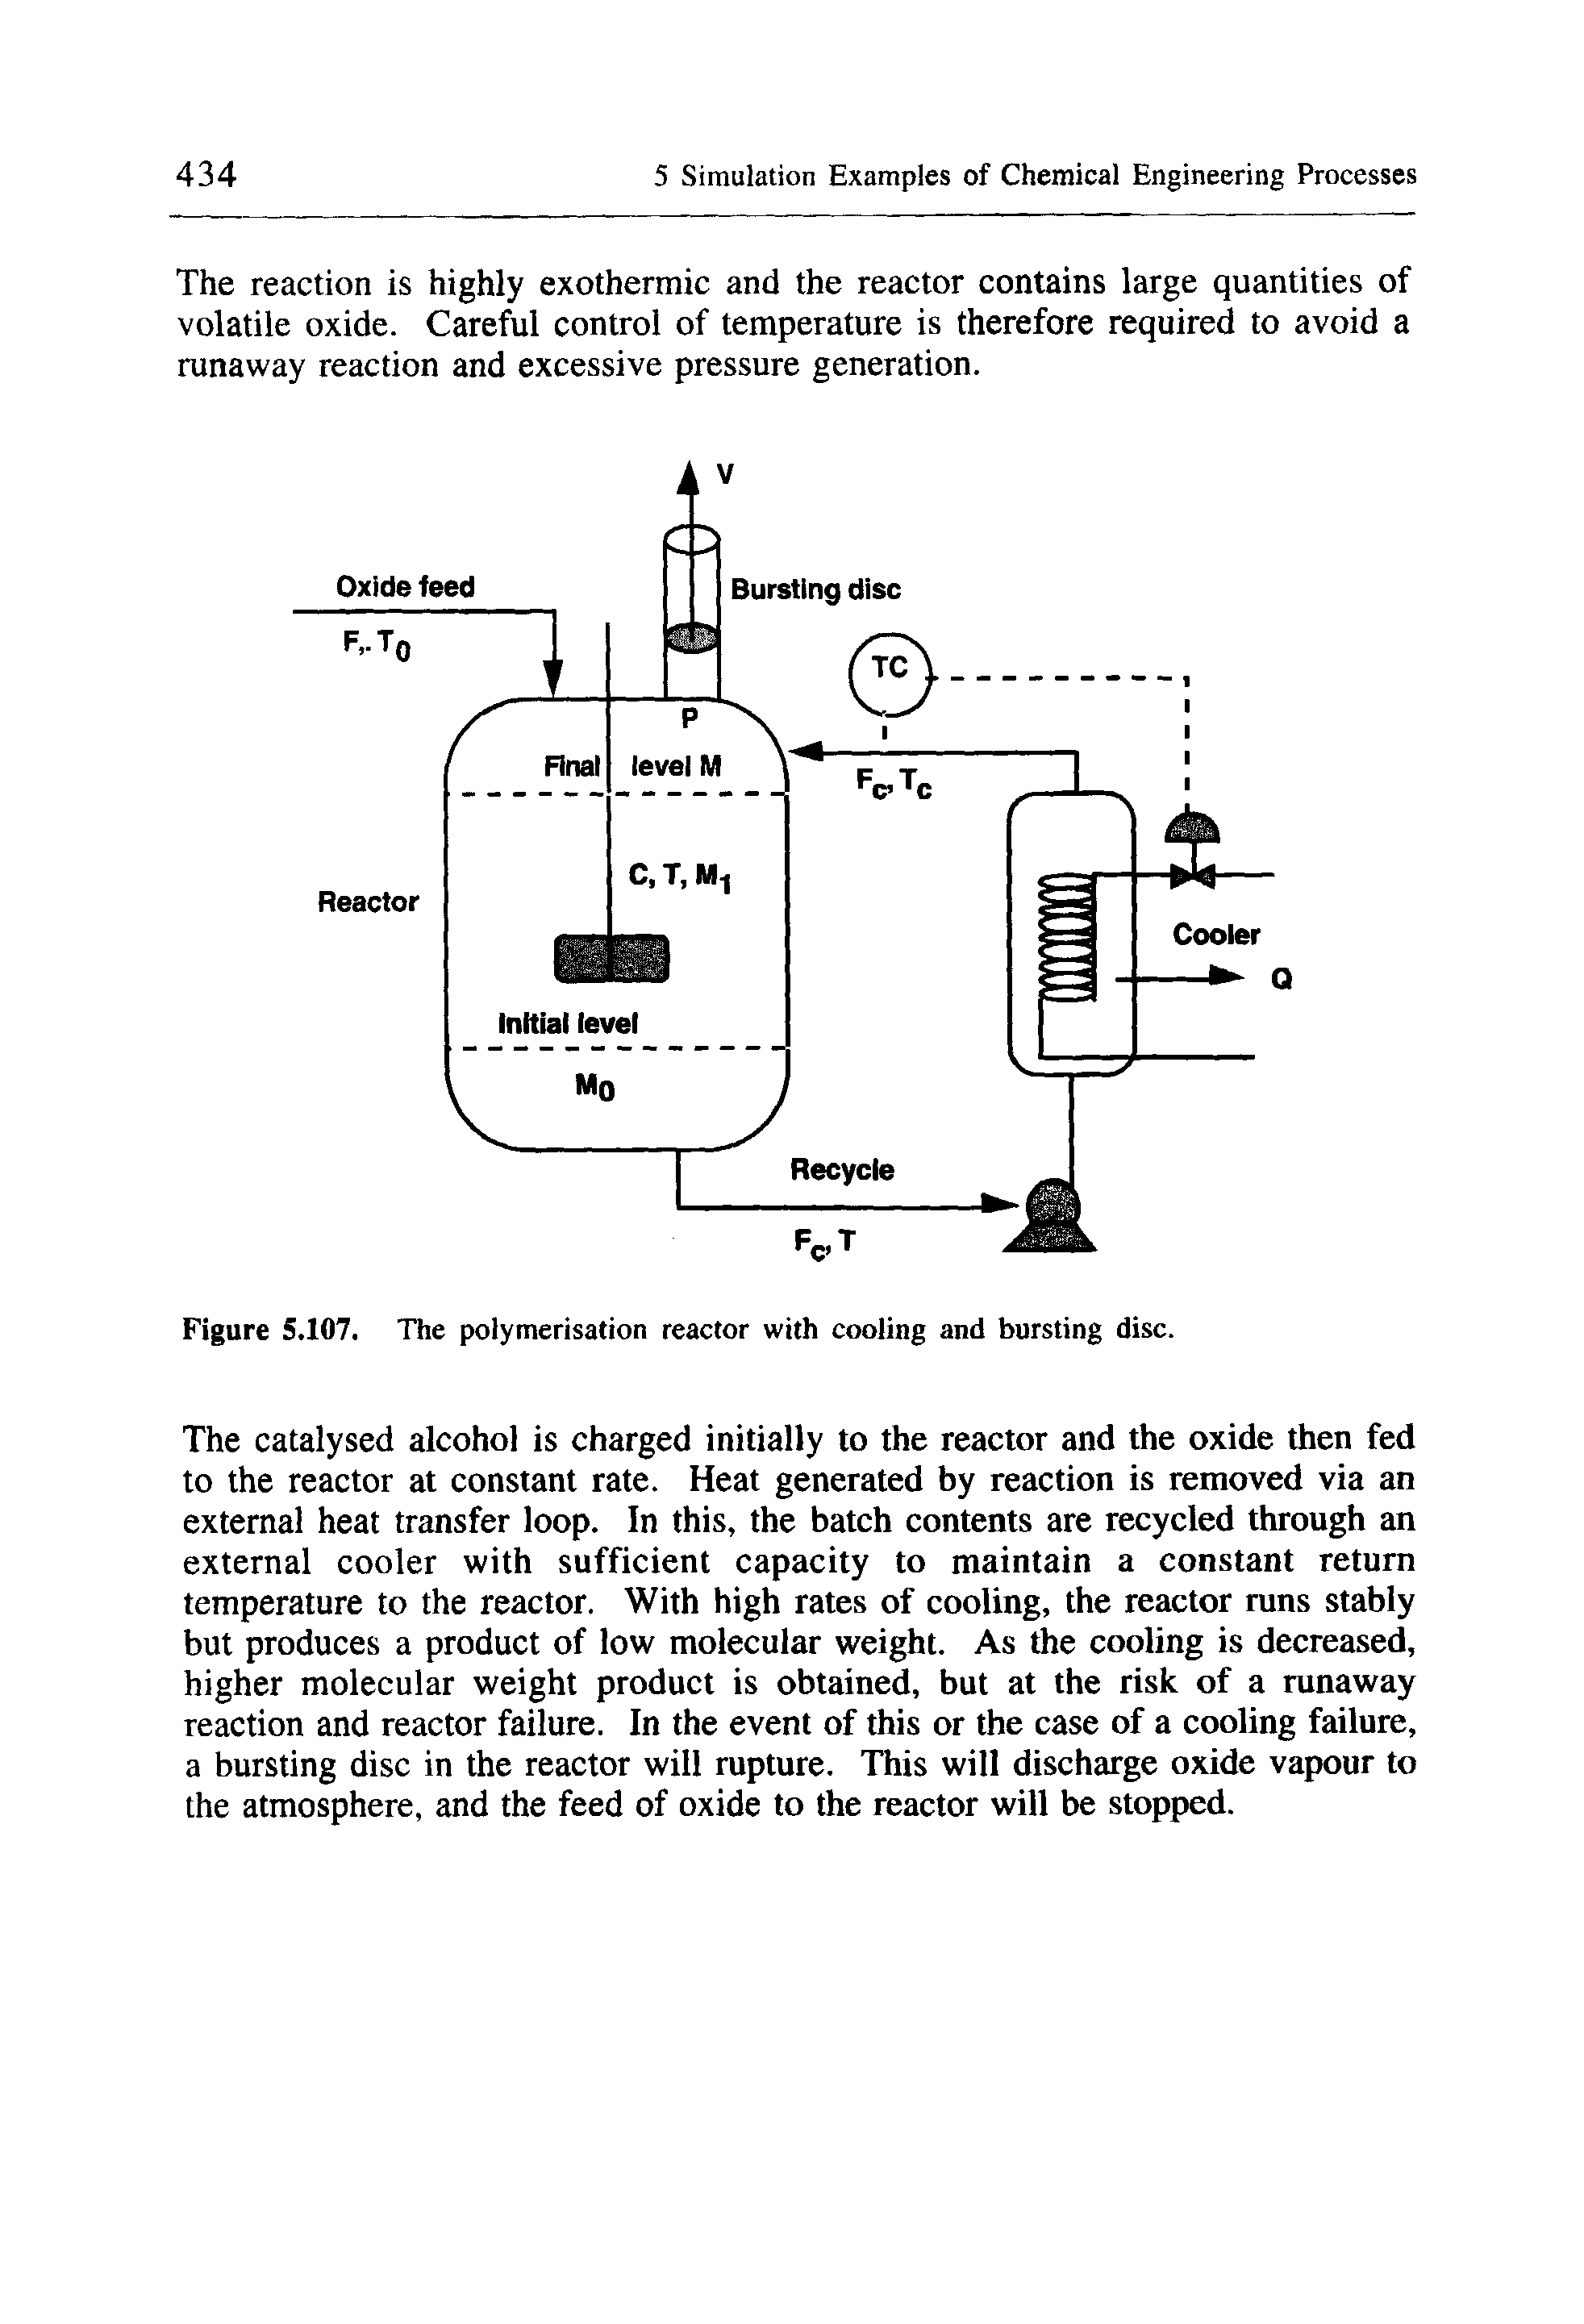 Figure 5.107. The polymerisation reactor with cooling and bursting disc.